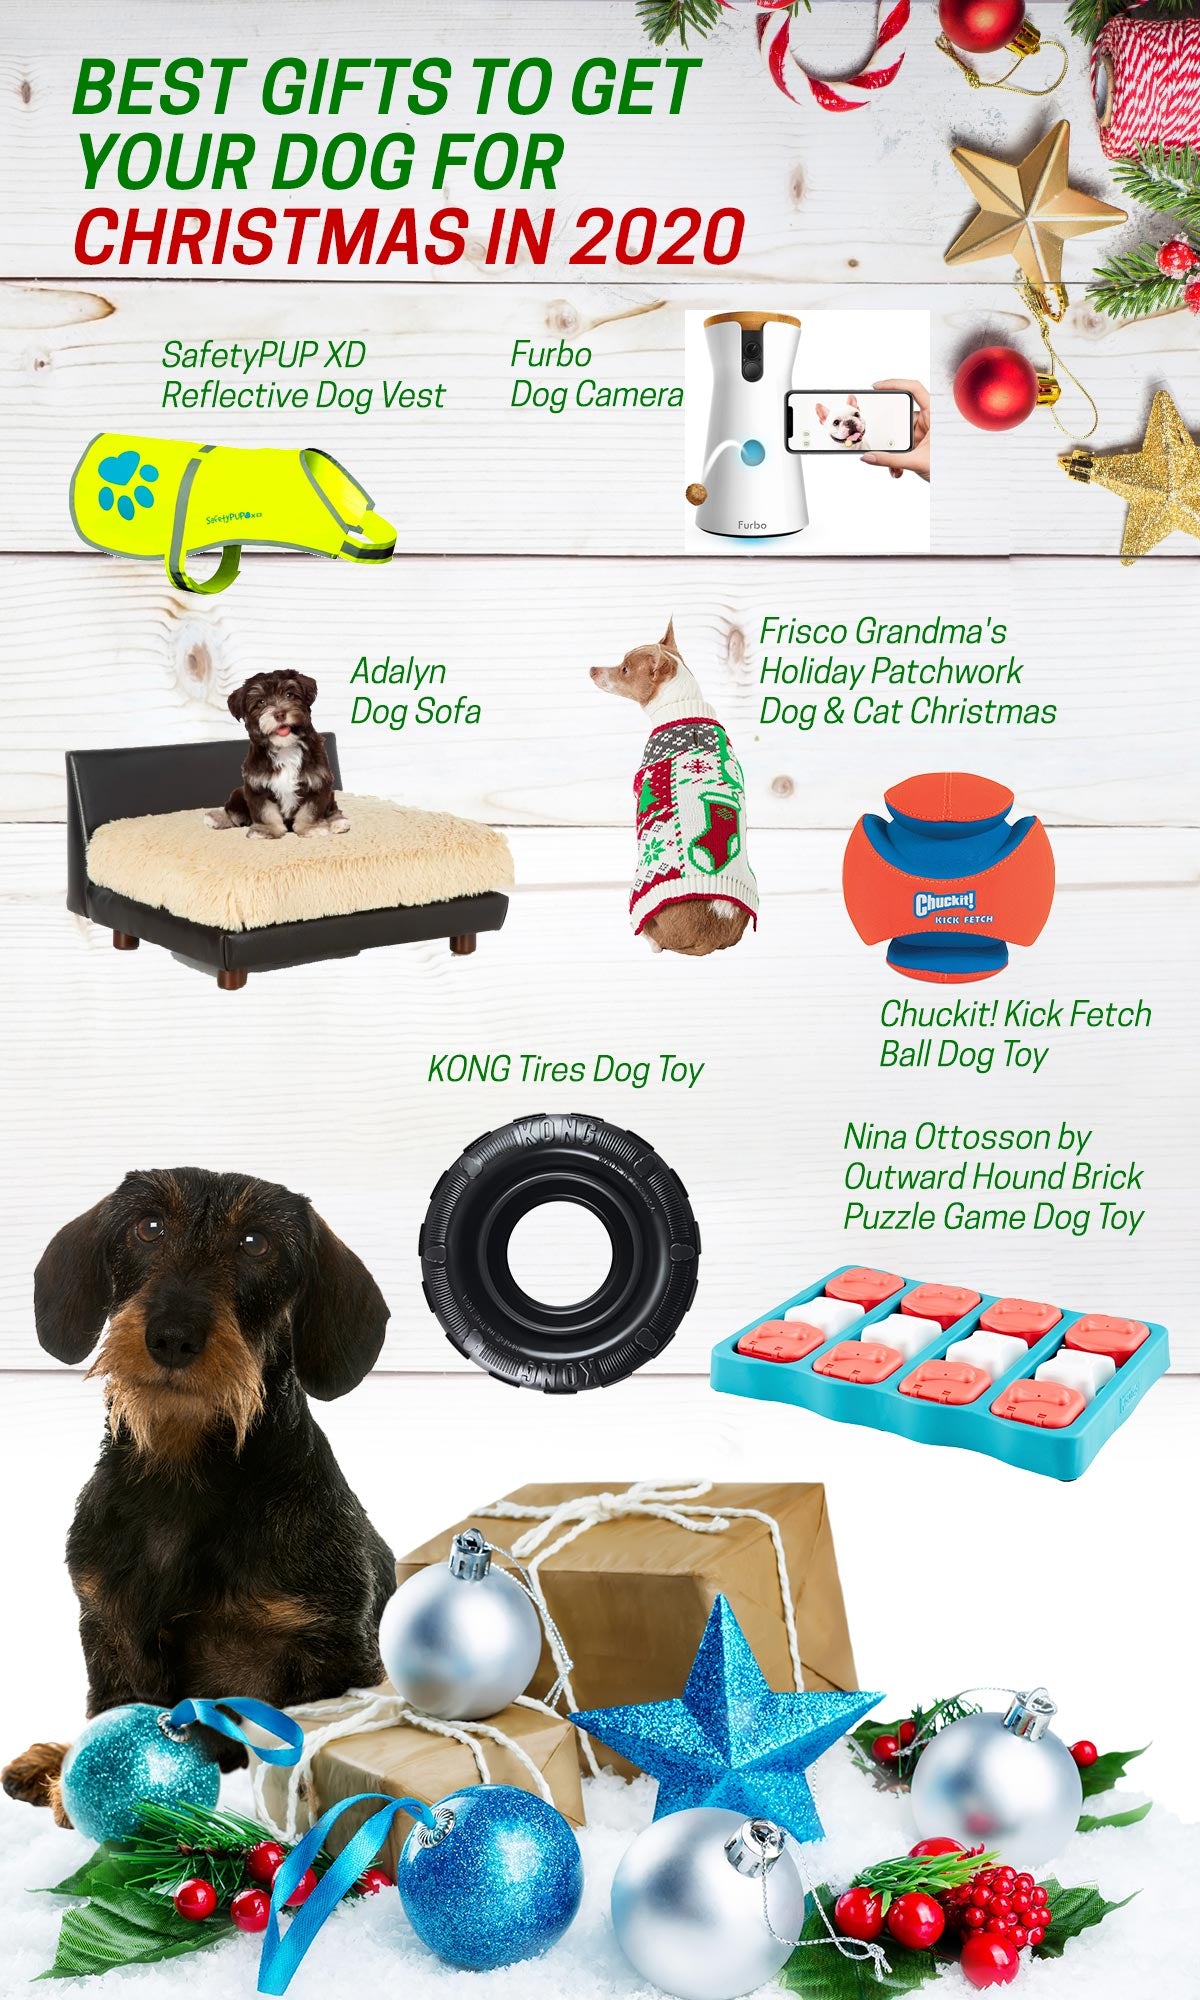 The 15 Best Christmas Gifts for your Dog in 2020 Infographic